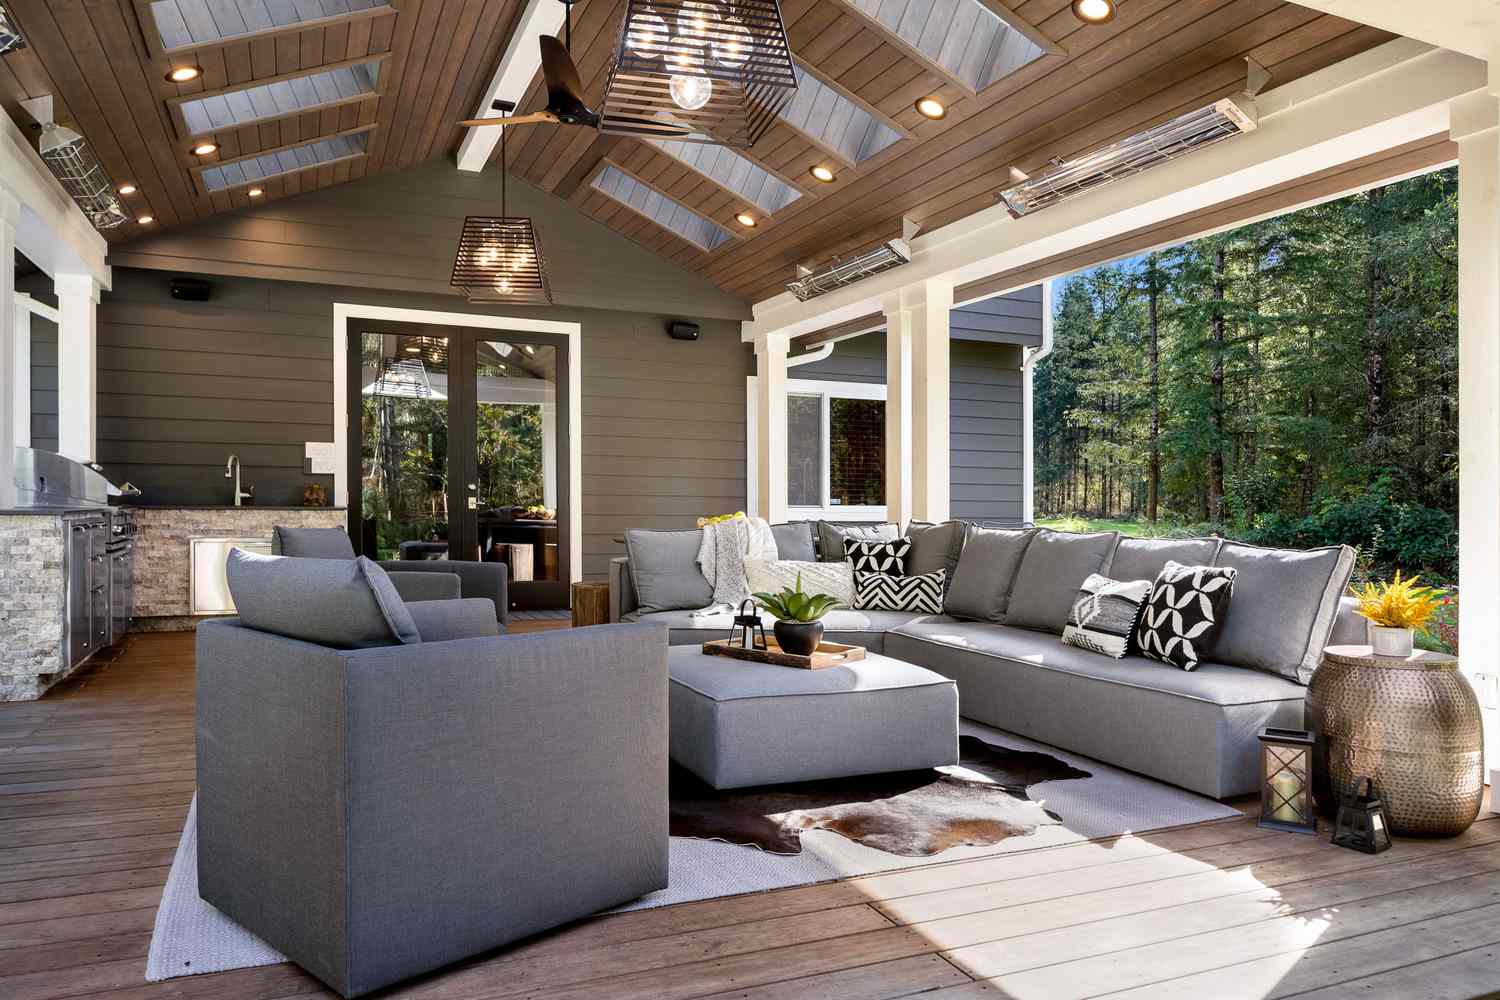 24 Back Porch Ideas to Inspire Your Outdoor Retreat [Video]